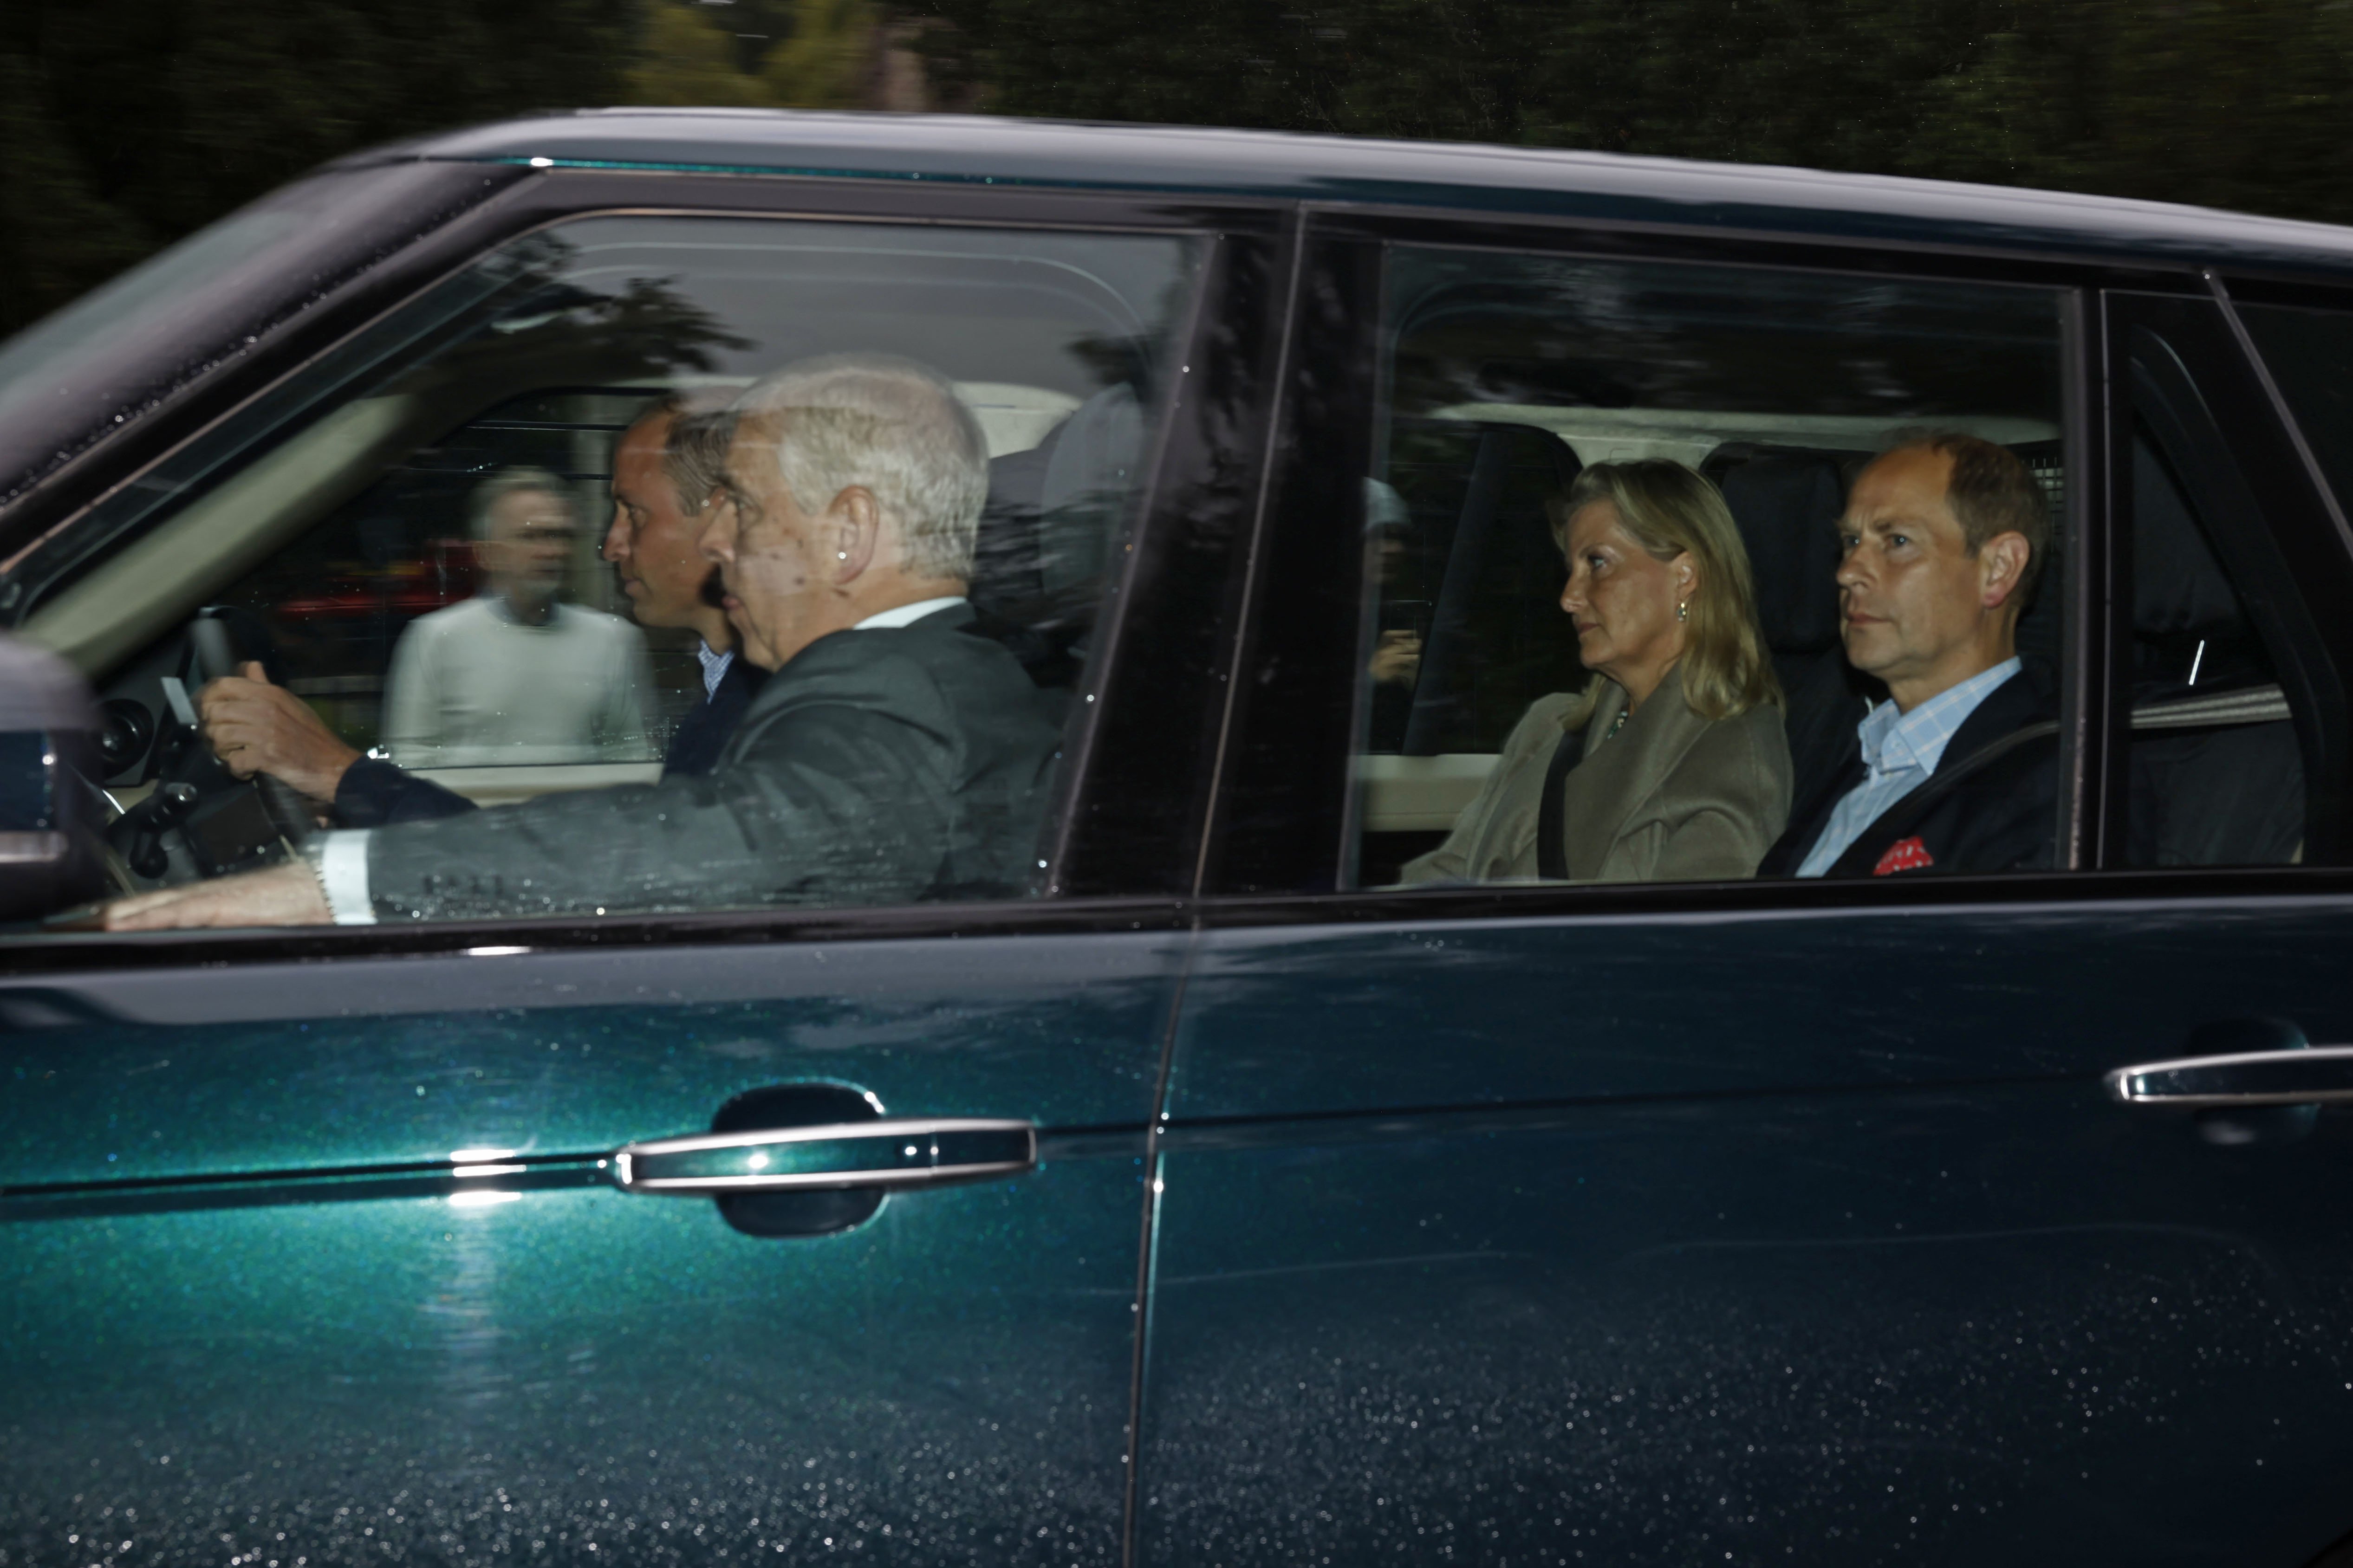 Prince William, Prince Andrew, Sophie, Countess of Wessex and Edward, Earl of Wessex arrive to see Queen Elizabeth at Balmoral Castle on September 8, 2022 in Aberdeen, Scotland ┃Source: Getty Images